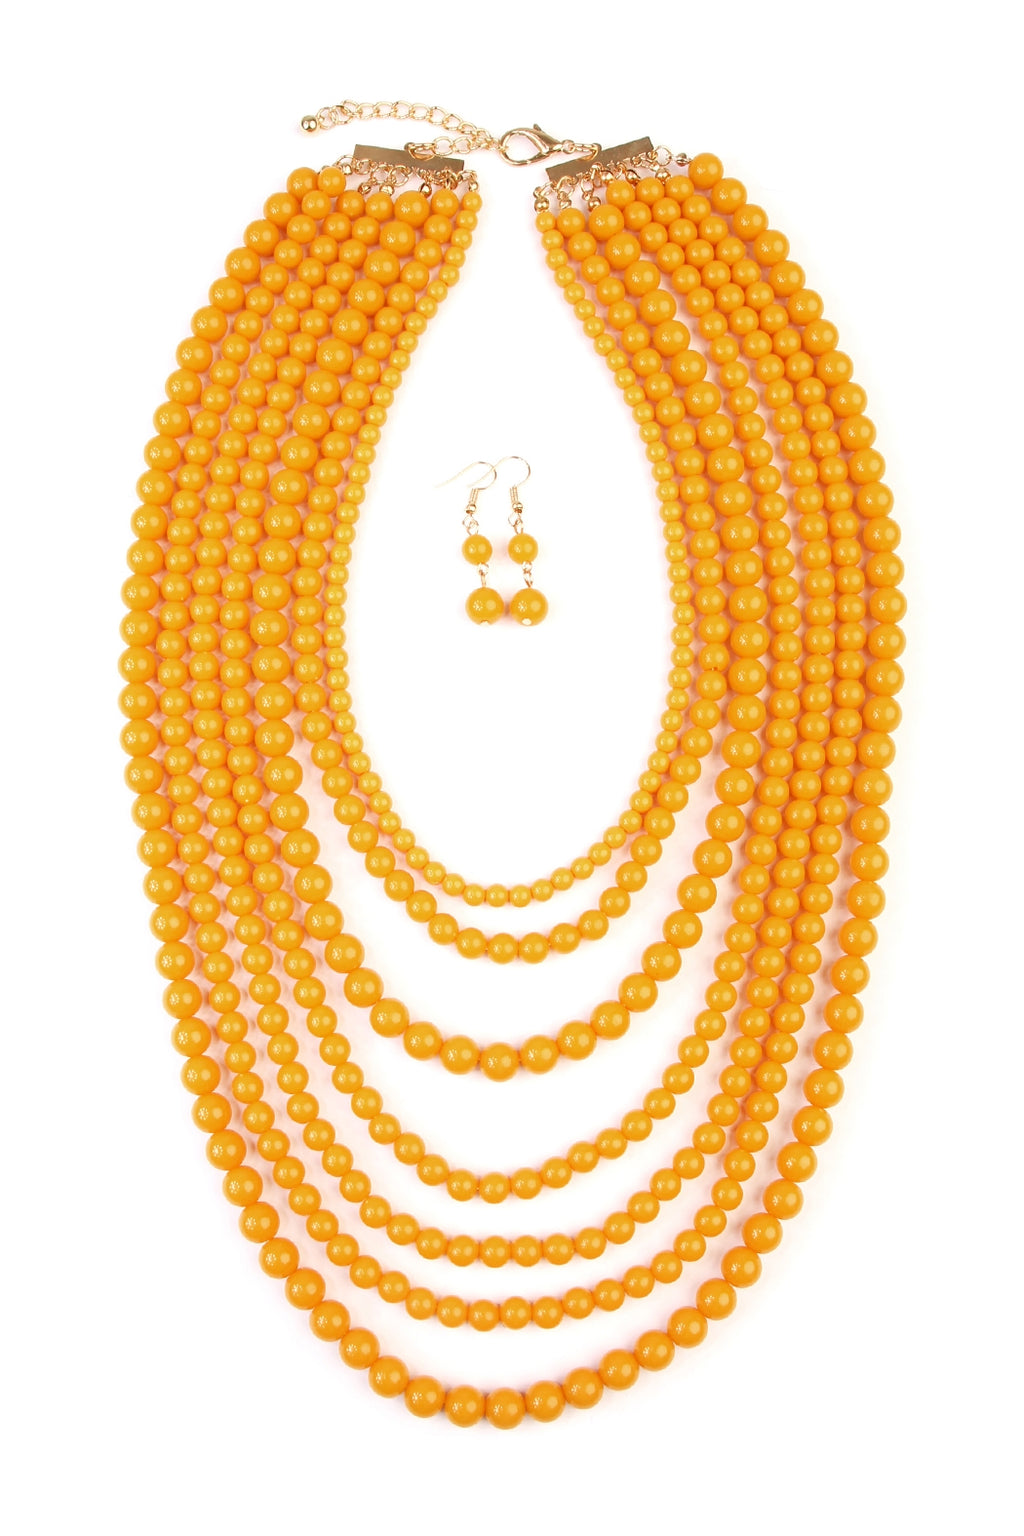 Multilayer Acrylic Mustard Necklace and Earring Set - Pack of 6